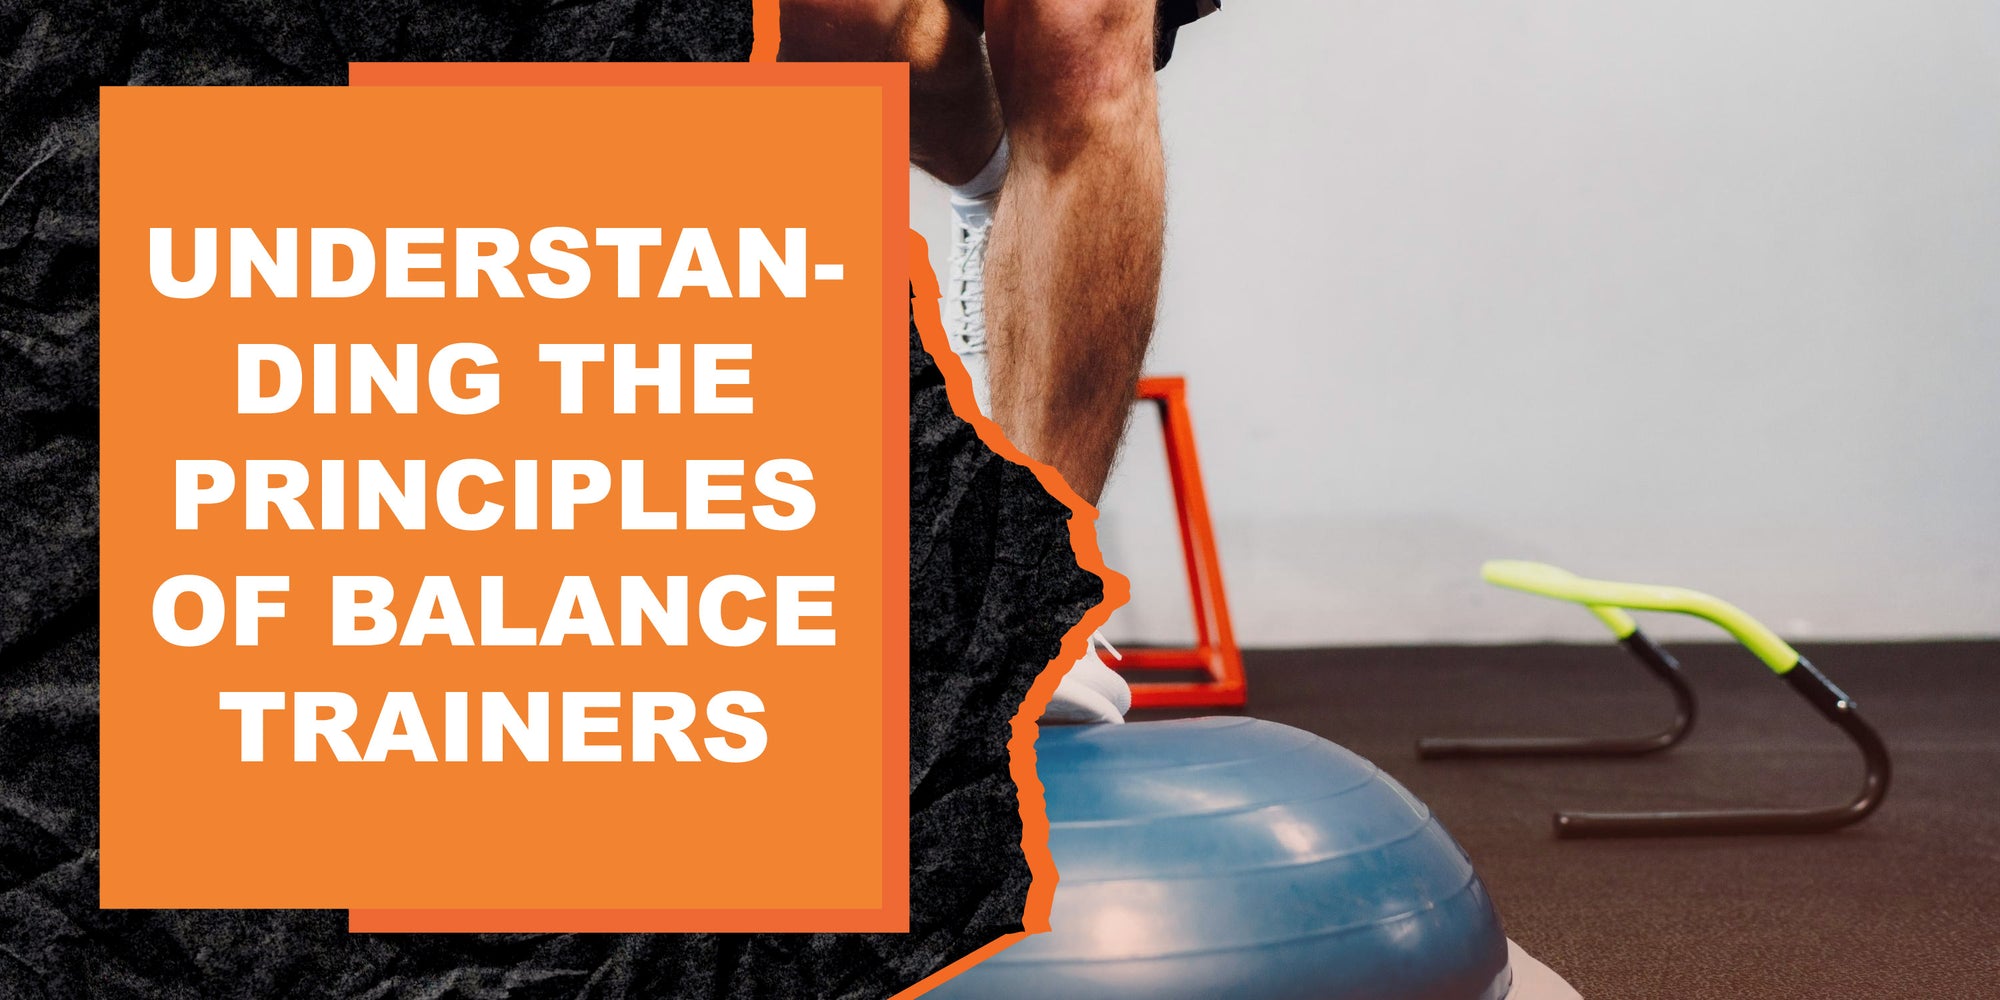 Understanding the Principles of Balance Trainers